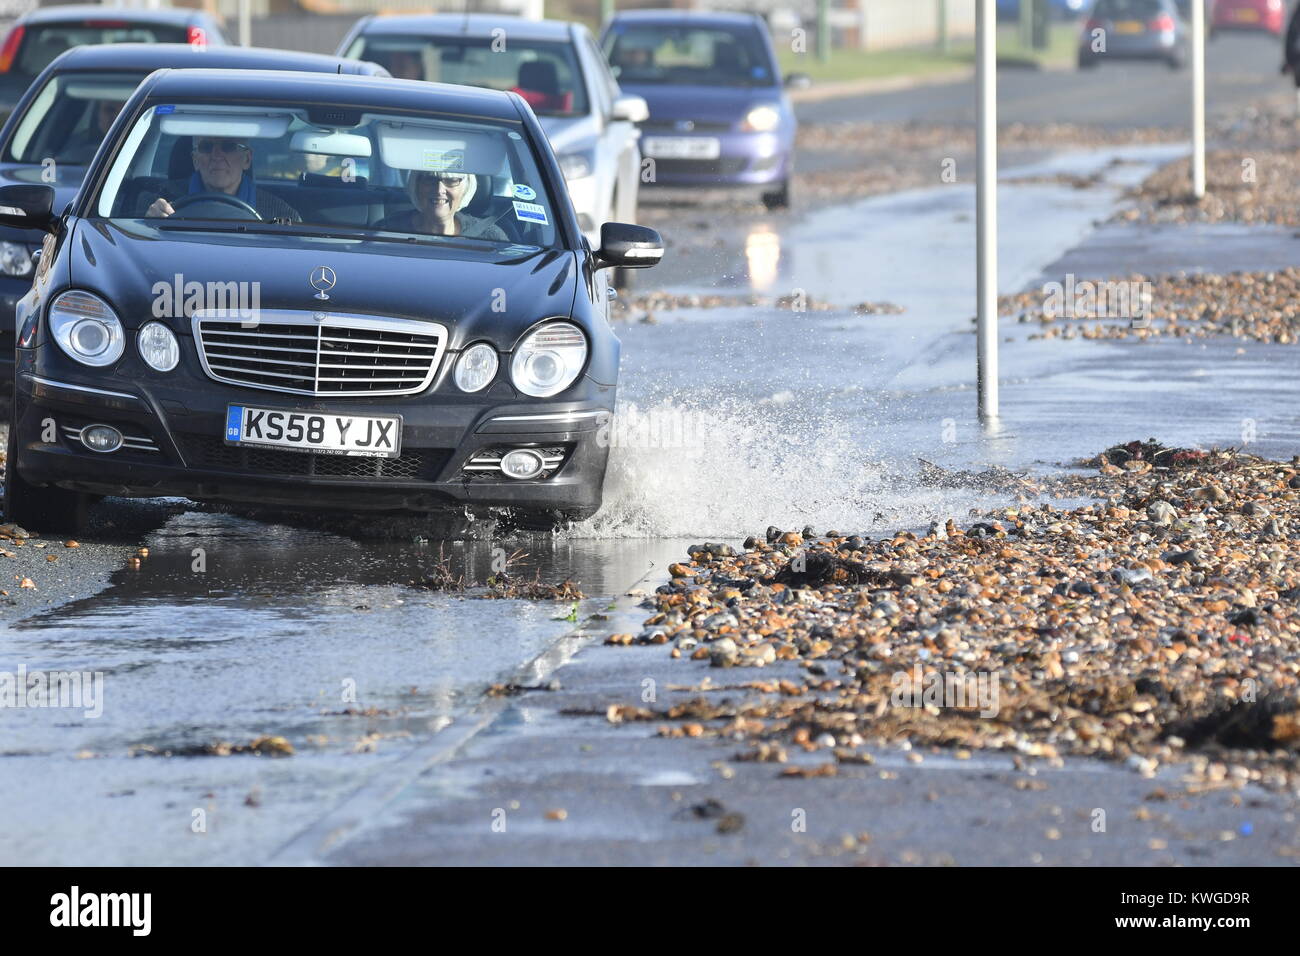 Sea Road, Rustington, West Sussex, England, UK. Wednesday 3rd January 2018. Cars battle through seawater and beach shingle on Sea Road in Rustington, after the windy conditions caused an abnormally high tide on the south coast. Credit: Geoff Smith/Alamy Live News Stock Photo